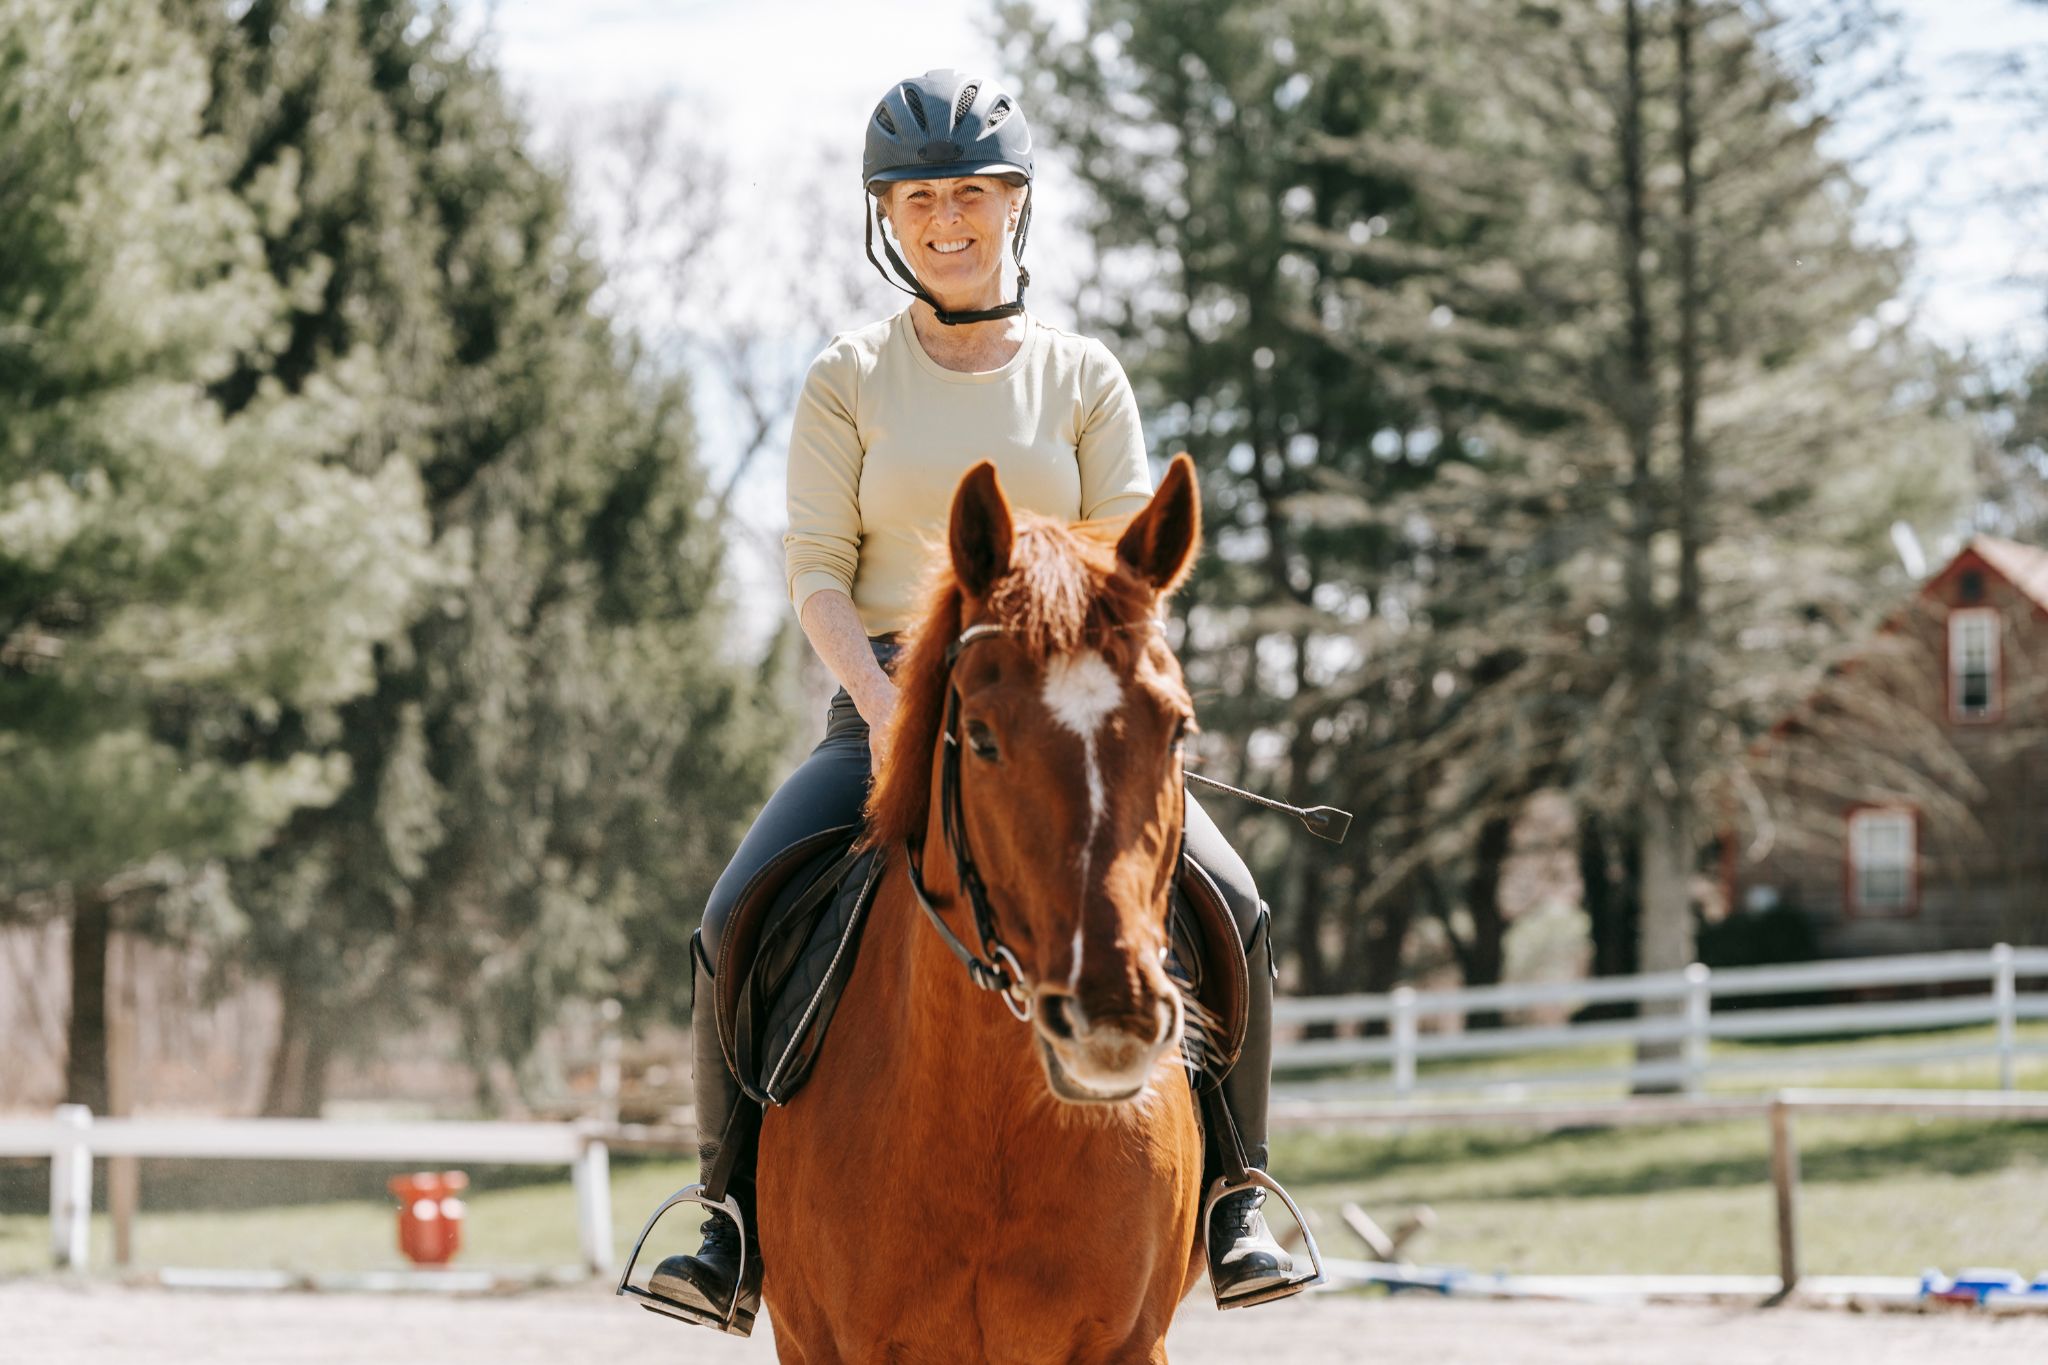 Getting More Out Of Your Hobbies As An Adult - Budget Equestrian